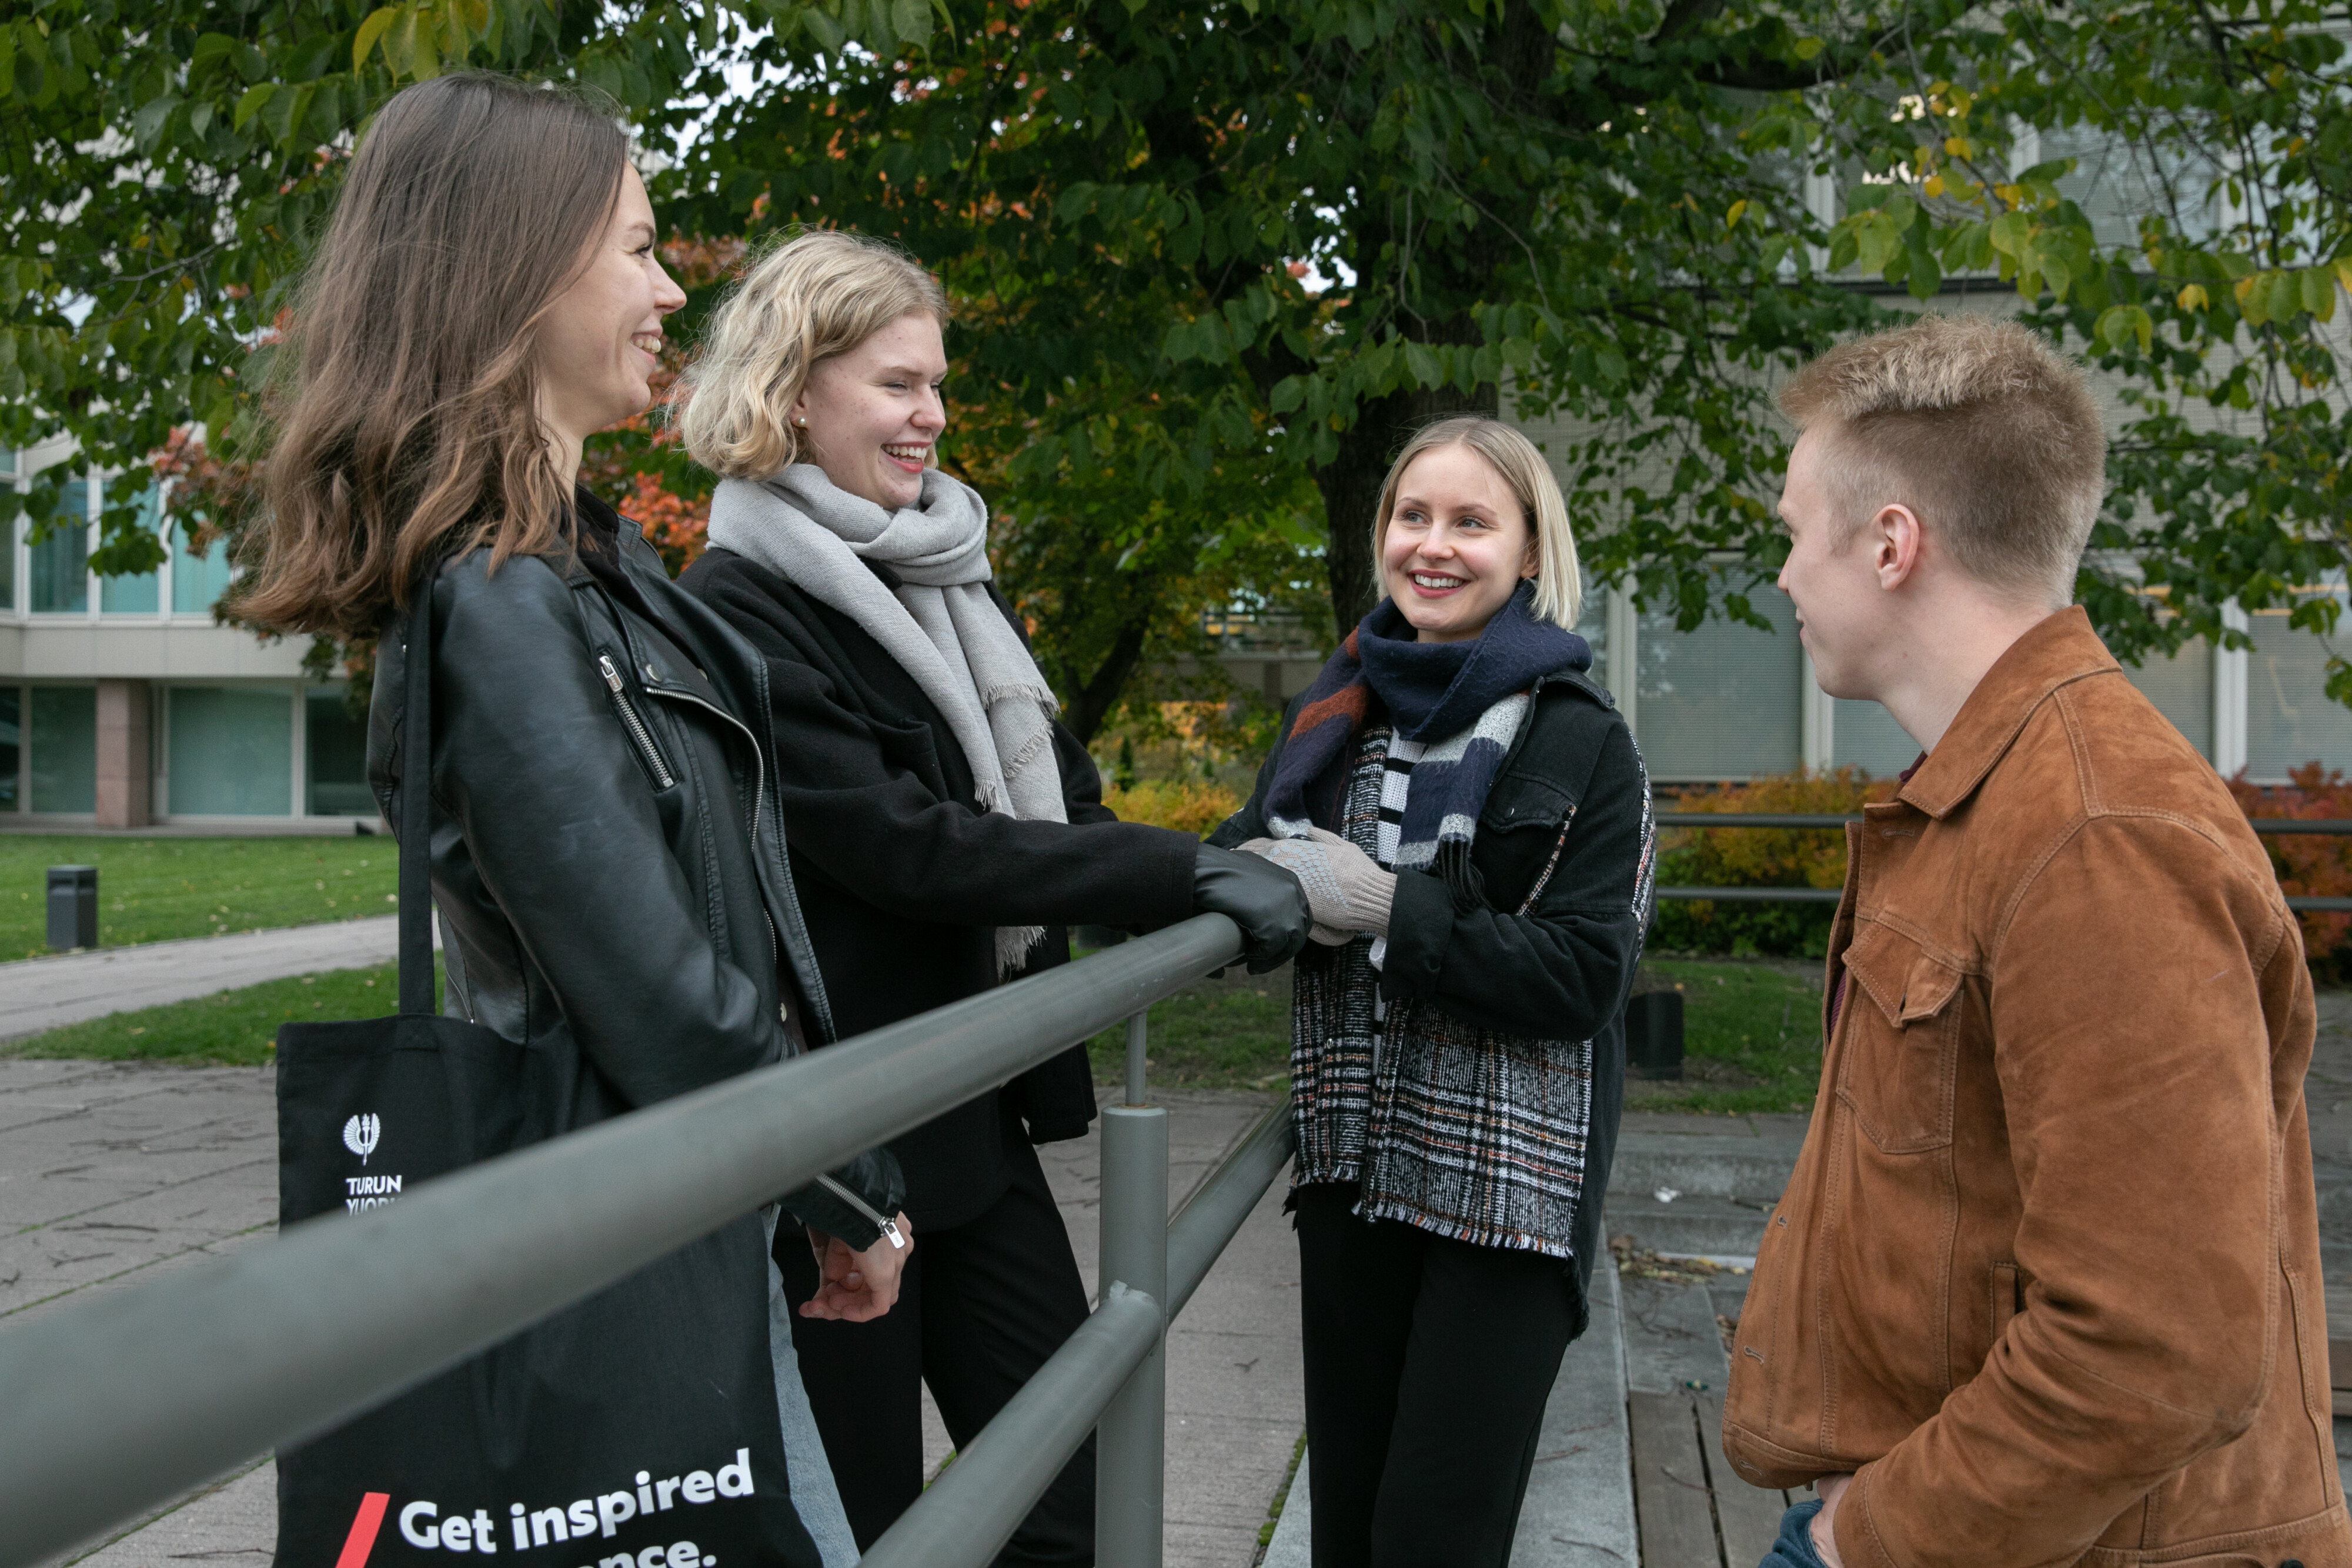 Pictures of students on University of Turku campus